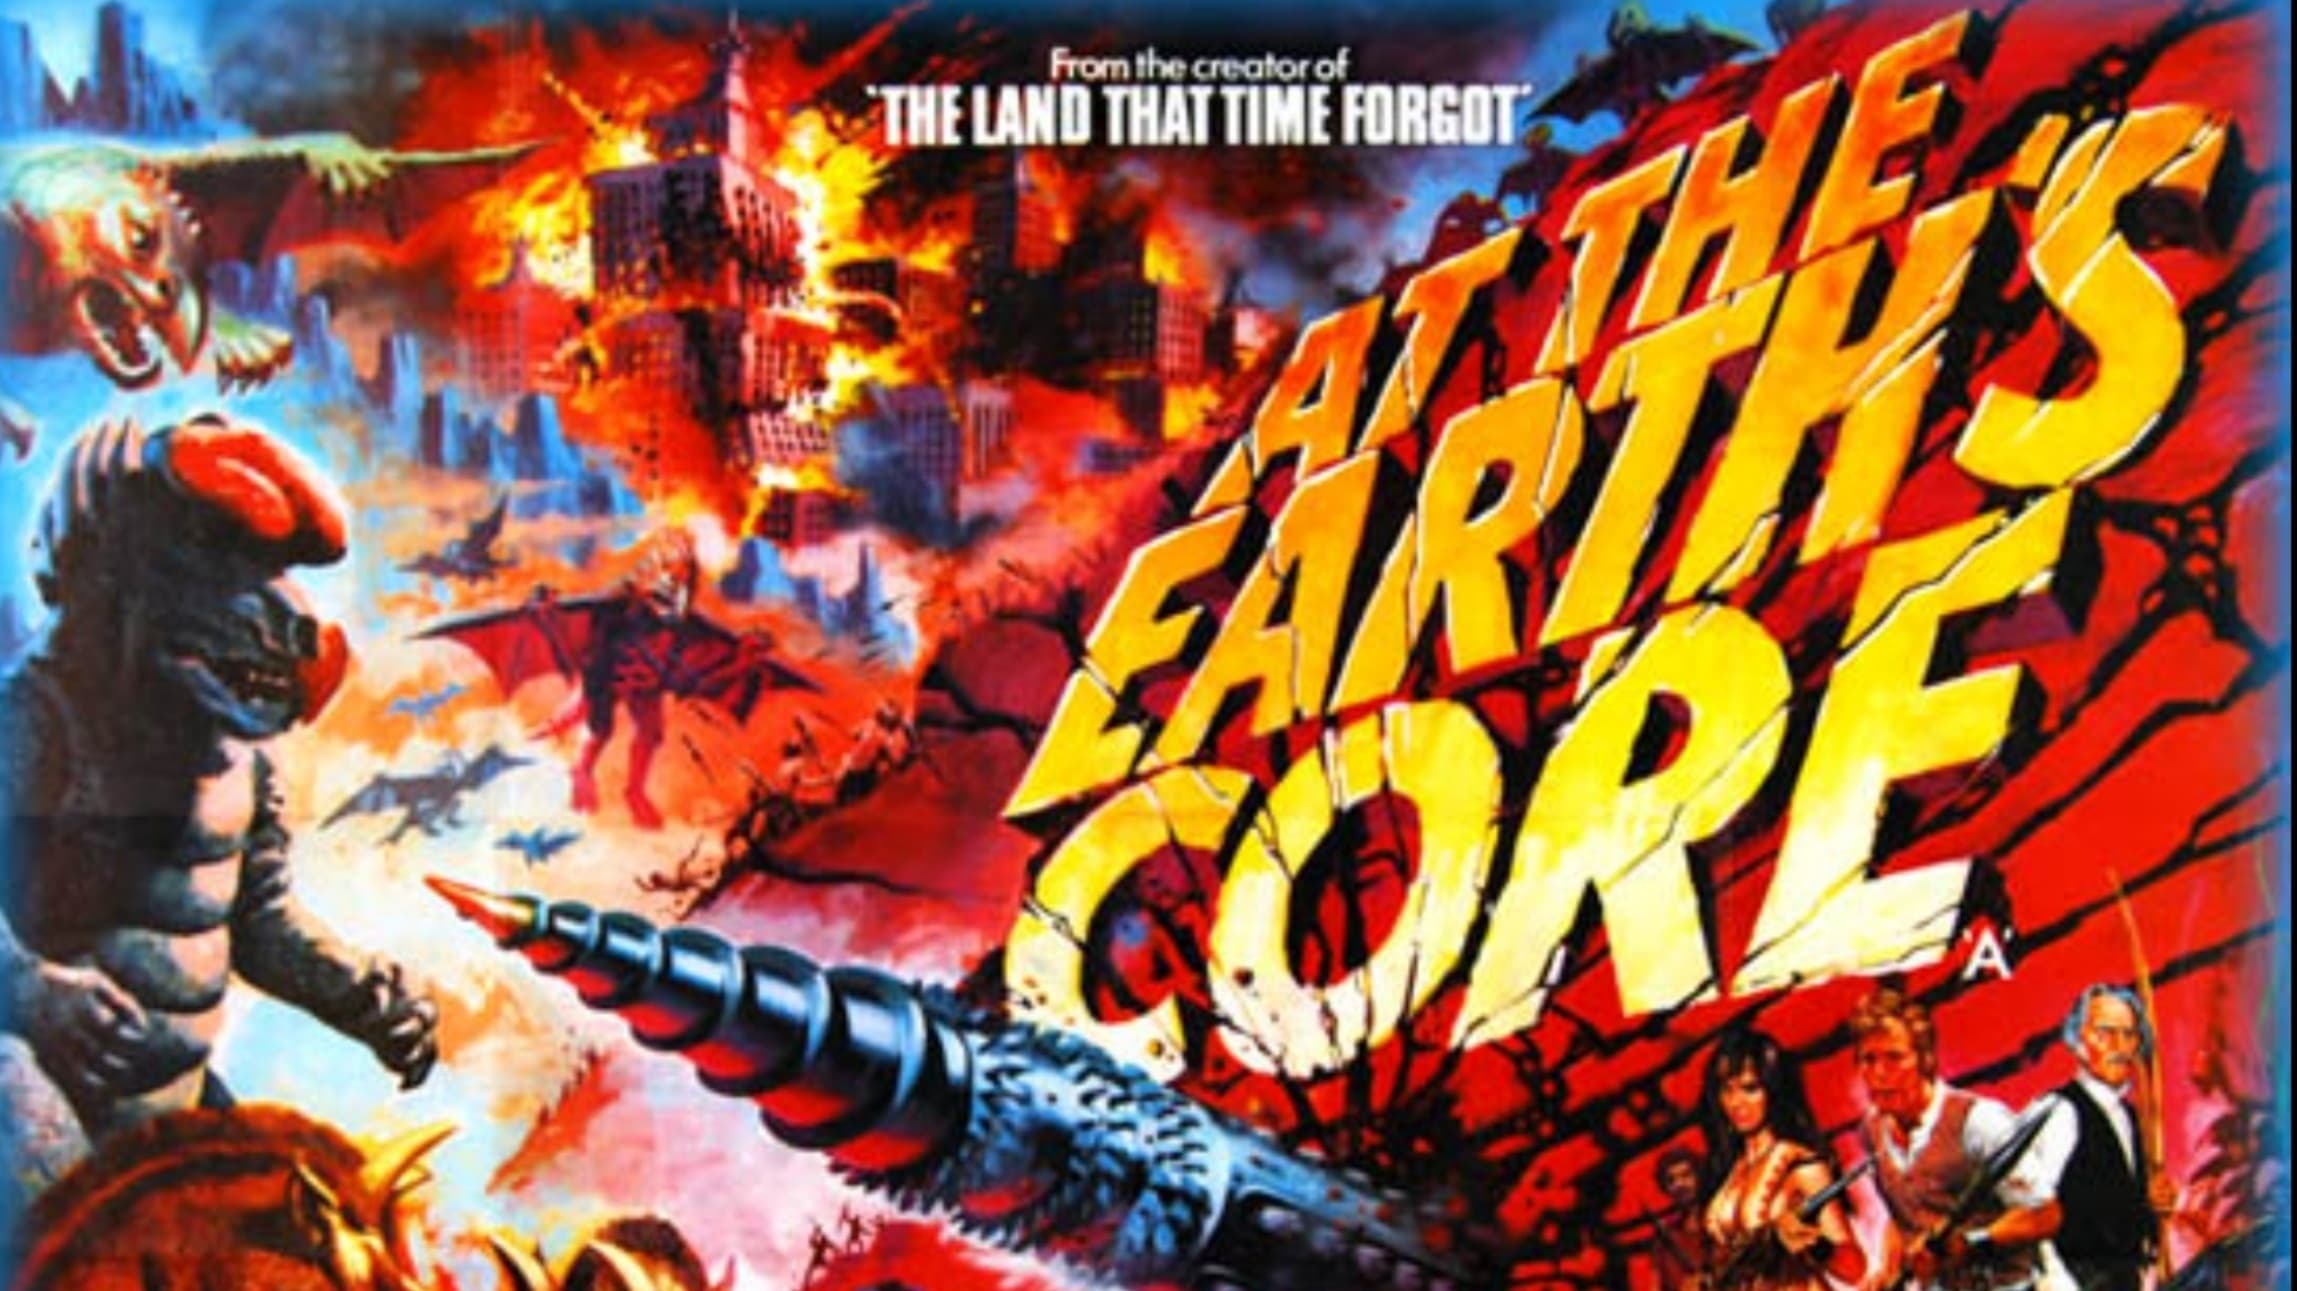 At the Earth's Core (1976)